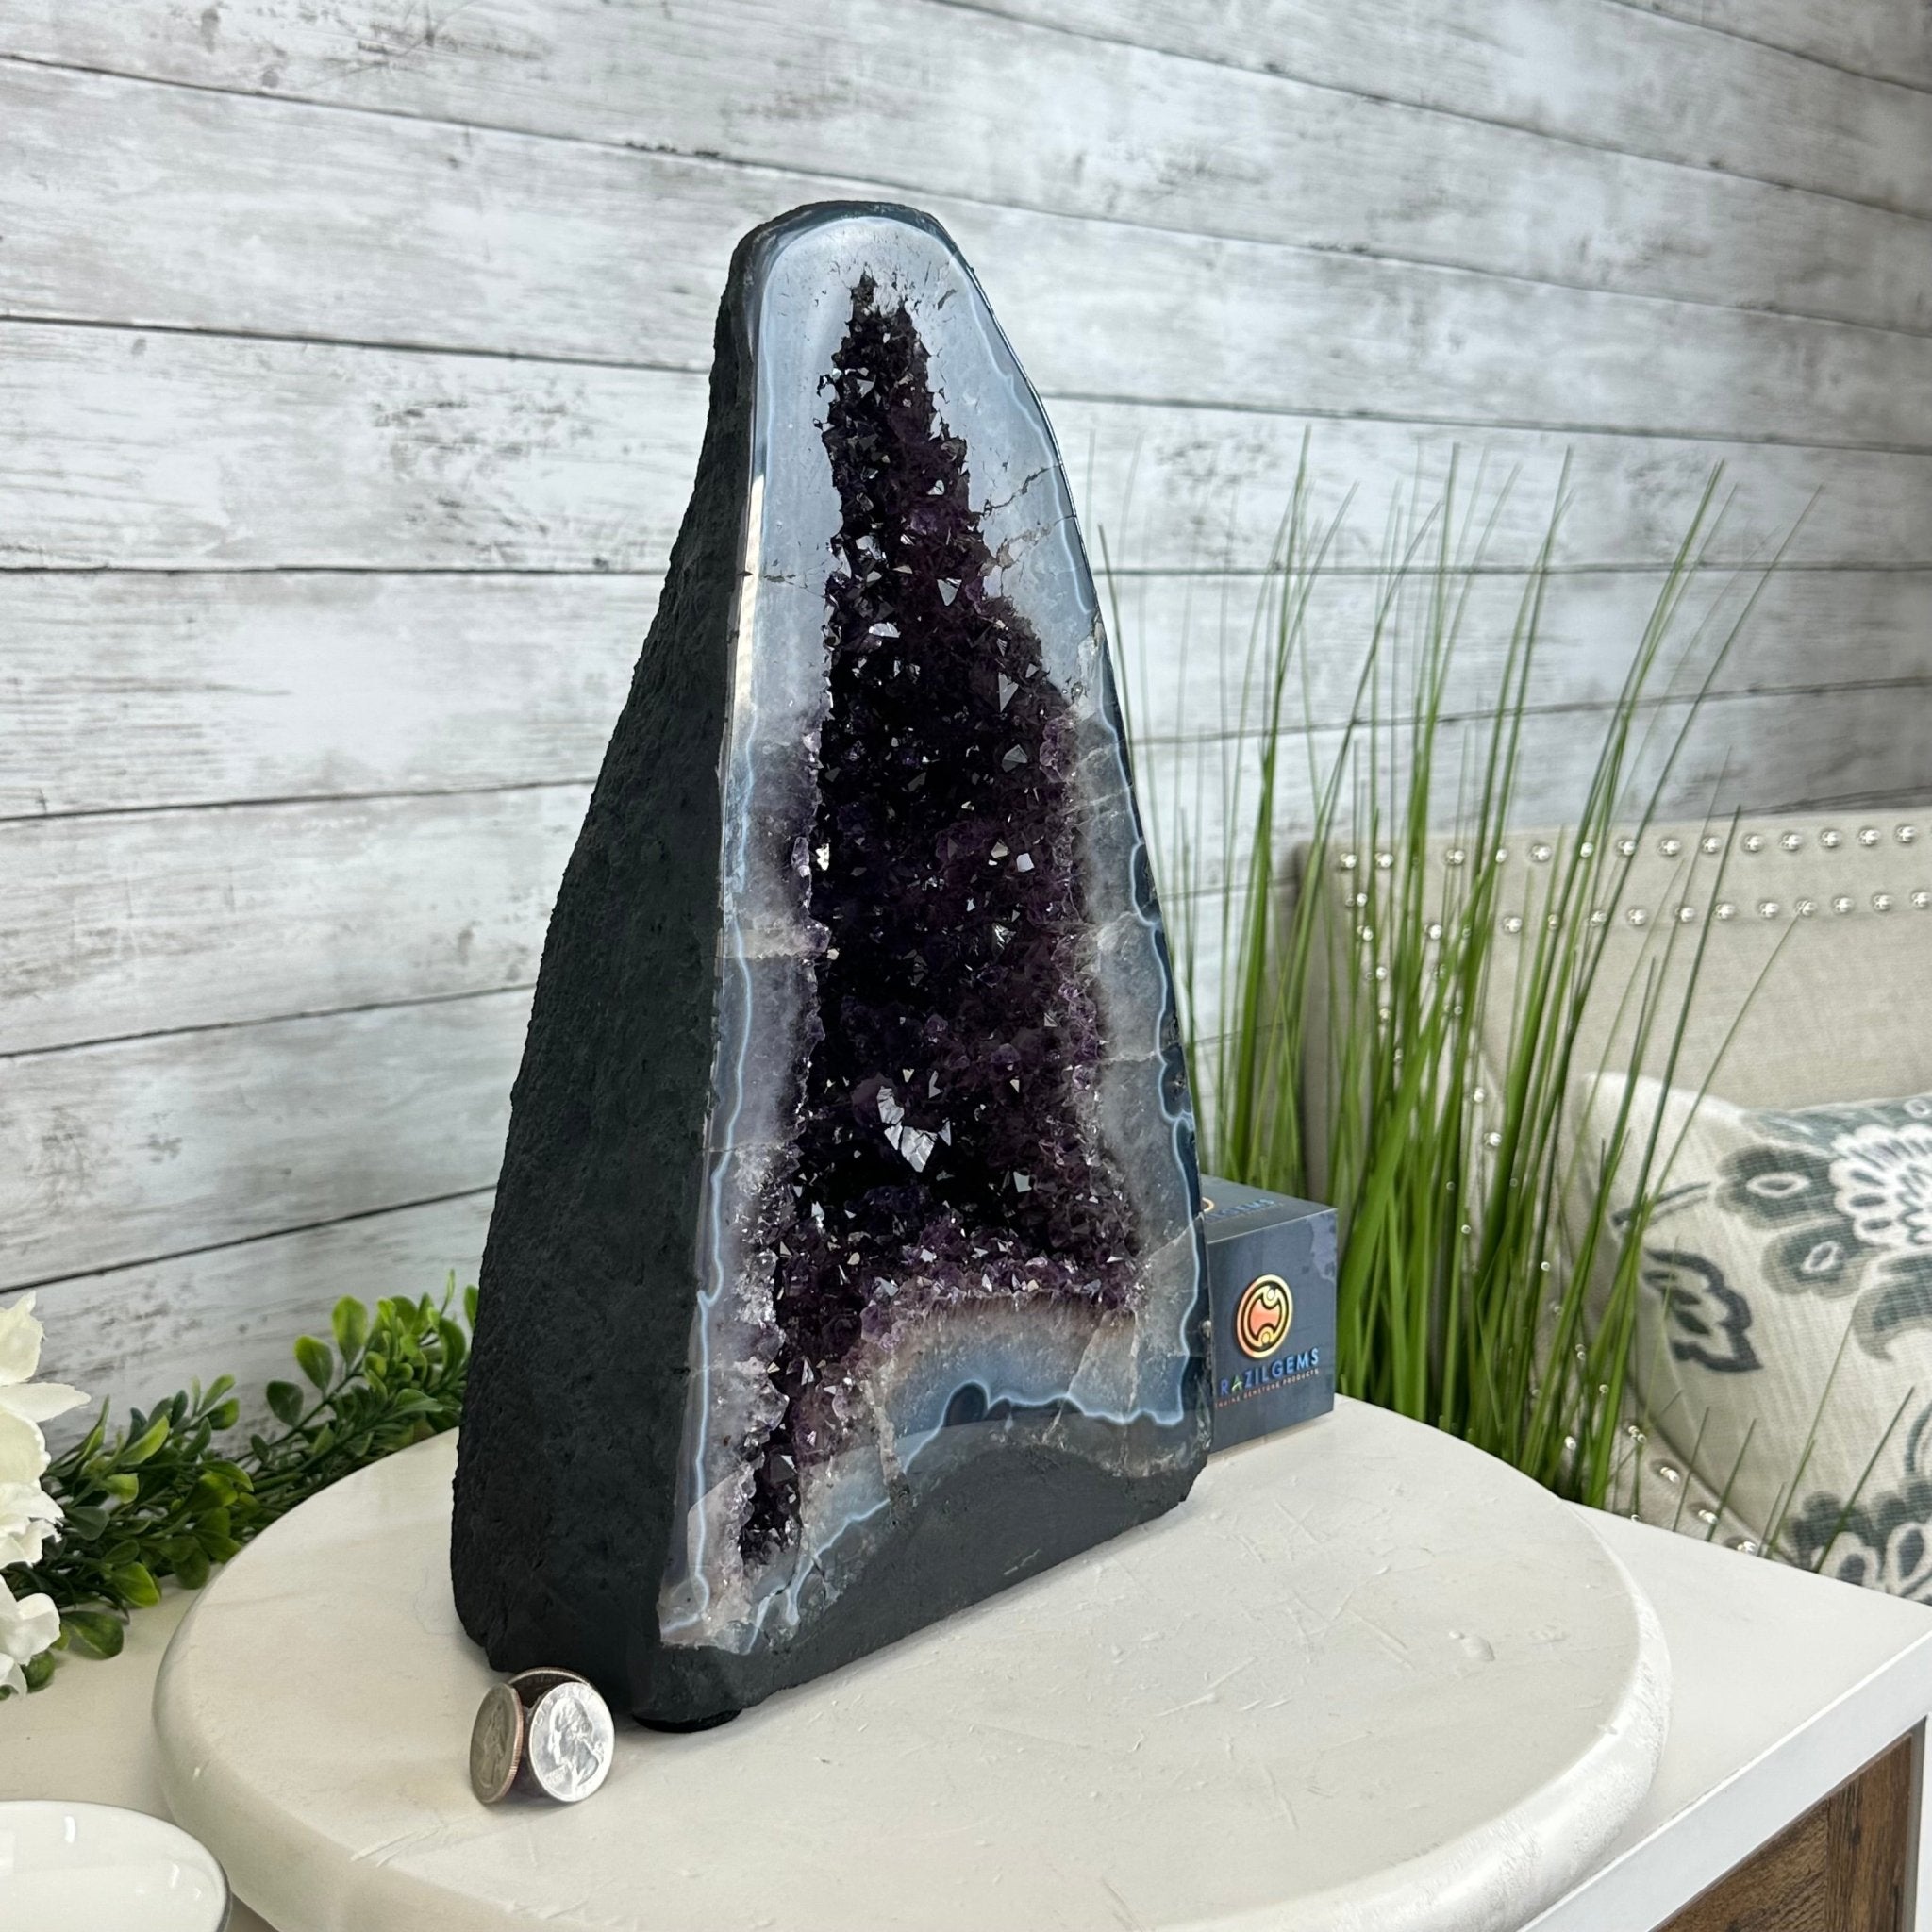 Quality Brazilian Amethyst Cathedral, 21 lbs & 13.2" Tall, #5601 - 1392 - Brazil GemsBrazil GemsQuality Brazilian Amethyst Cathedral, 21 lbs & 13.2" Tall, #5601 - 1392Cathedrals5601 - 1392